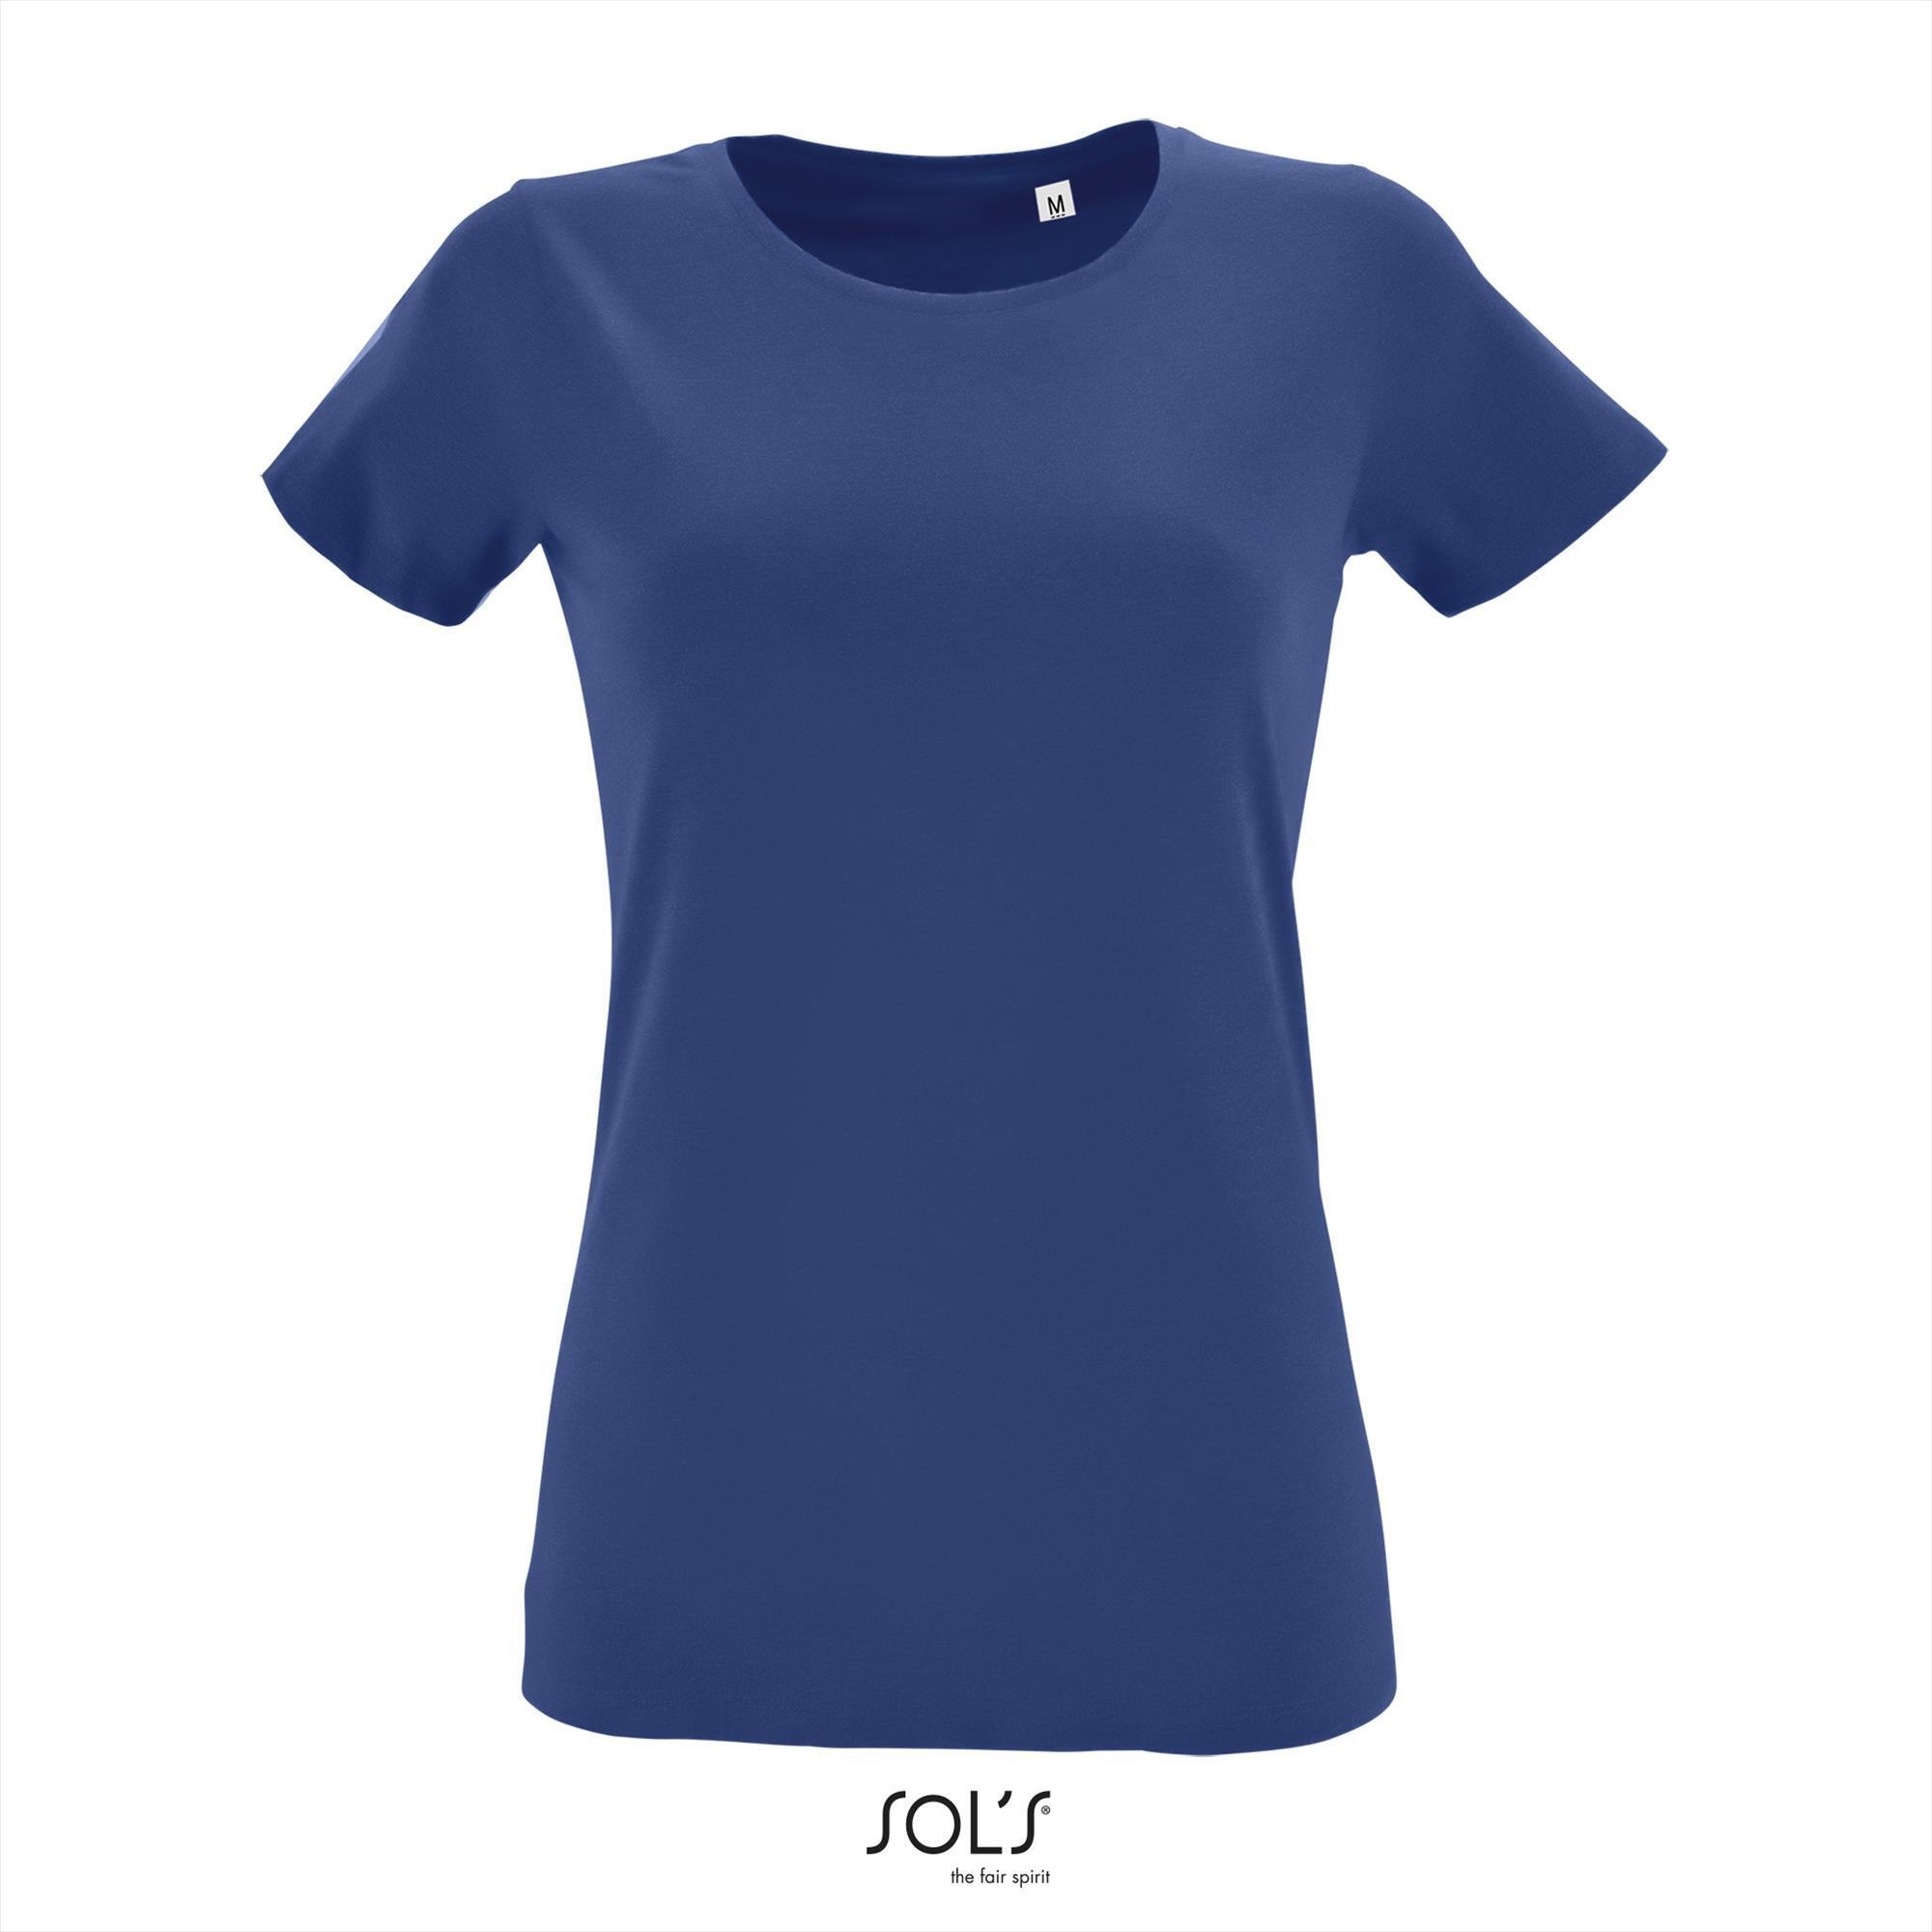 T-shirt Dames royal blauw fitted met ronde hals